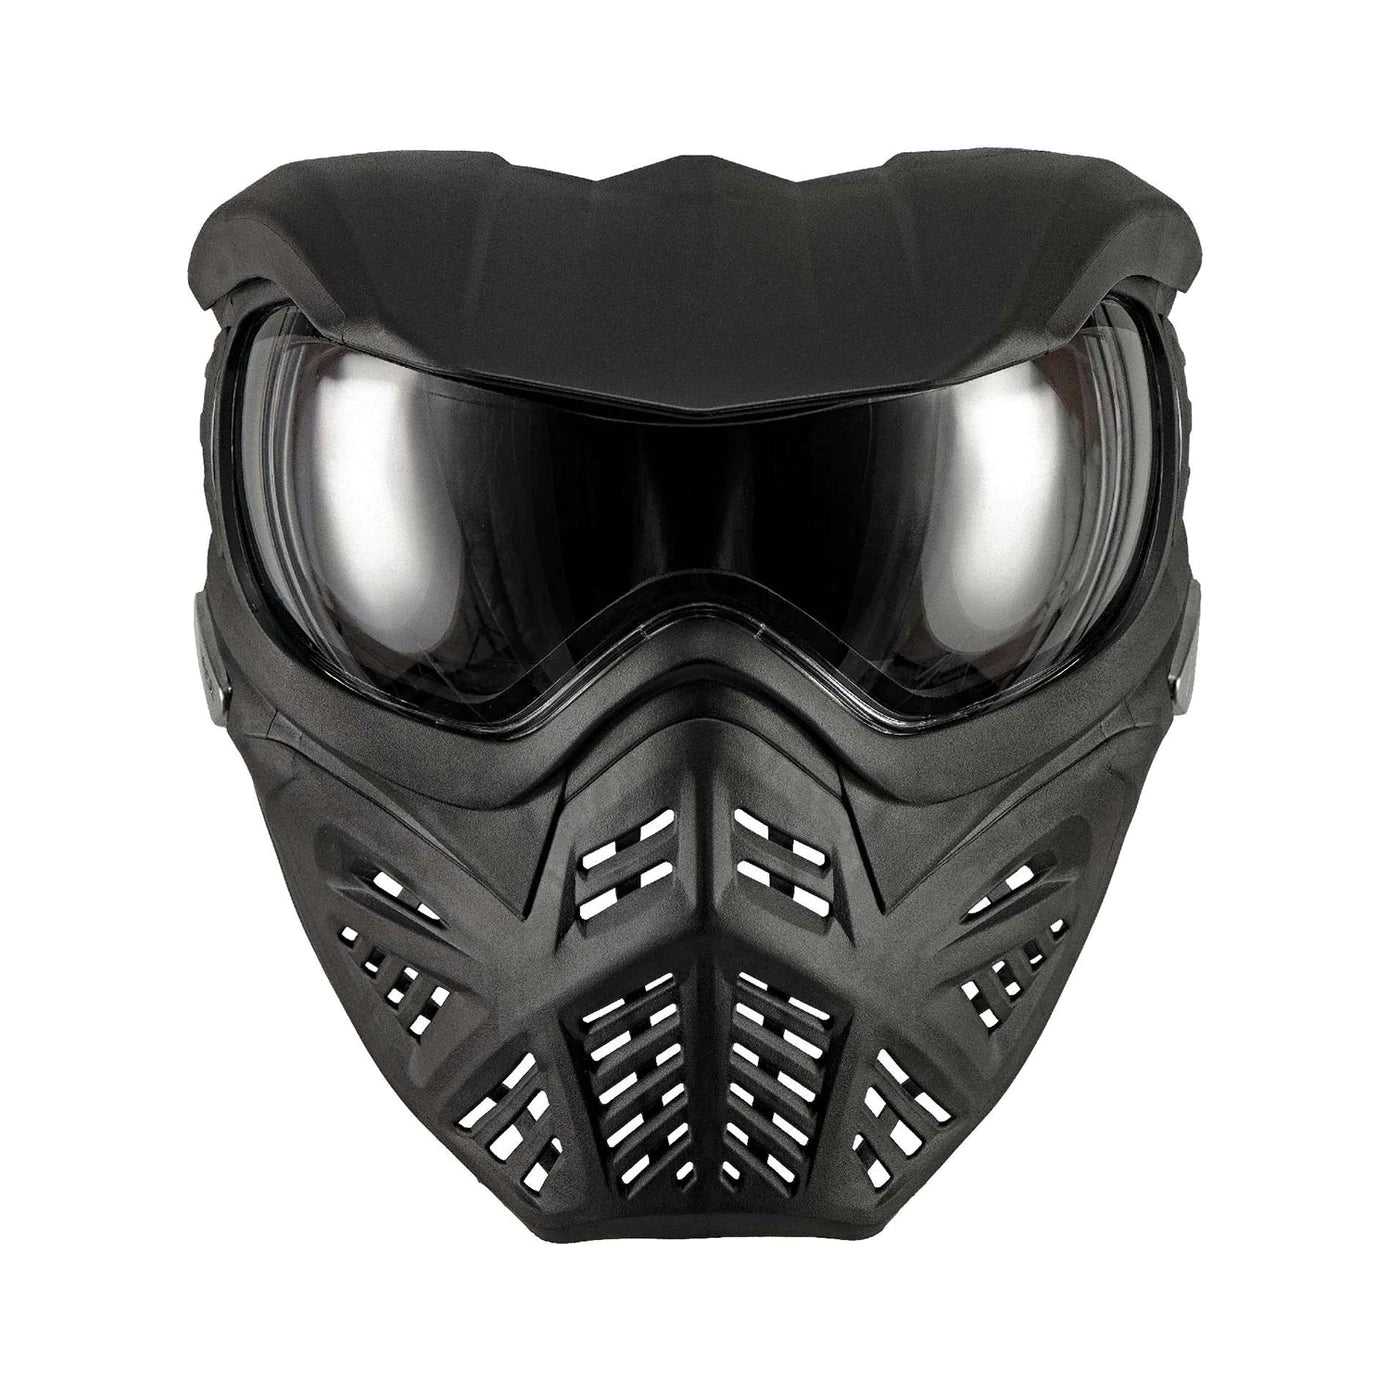 Vforce Grill 2.0 Black Paintball Mask